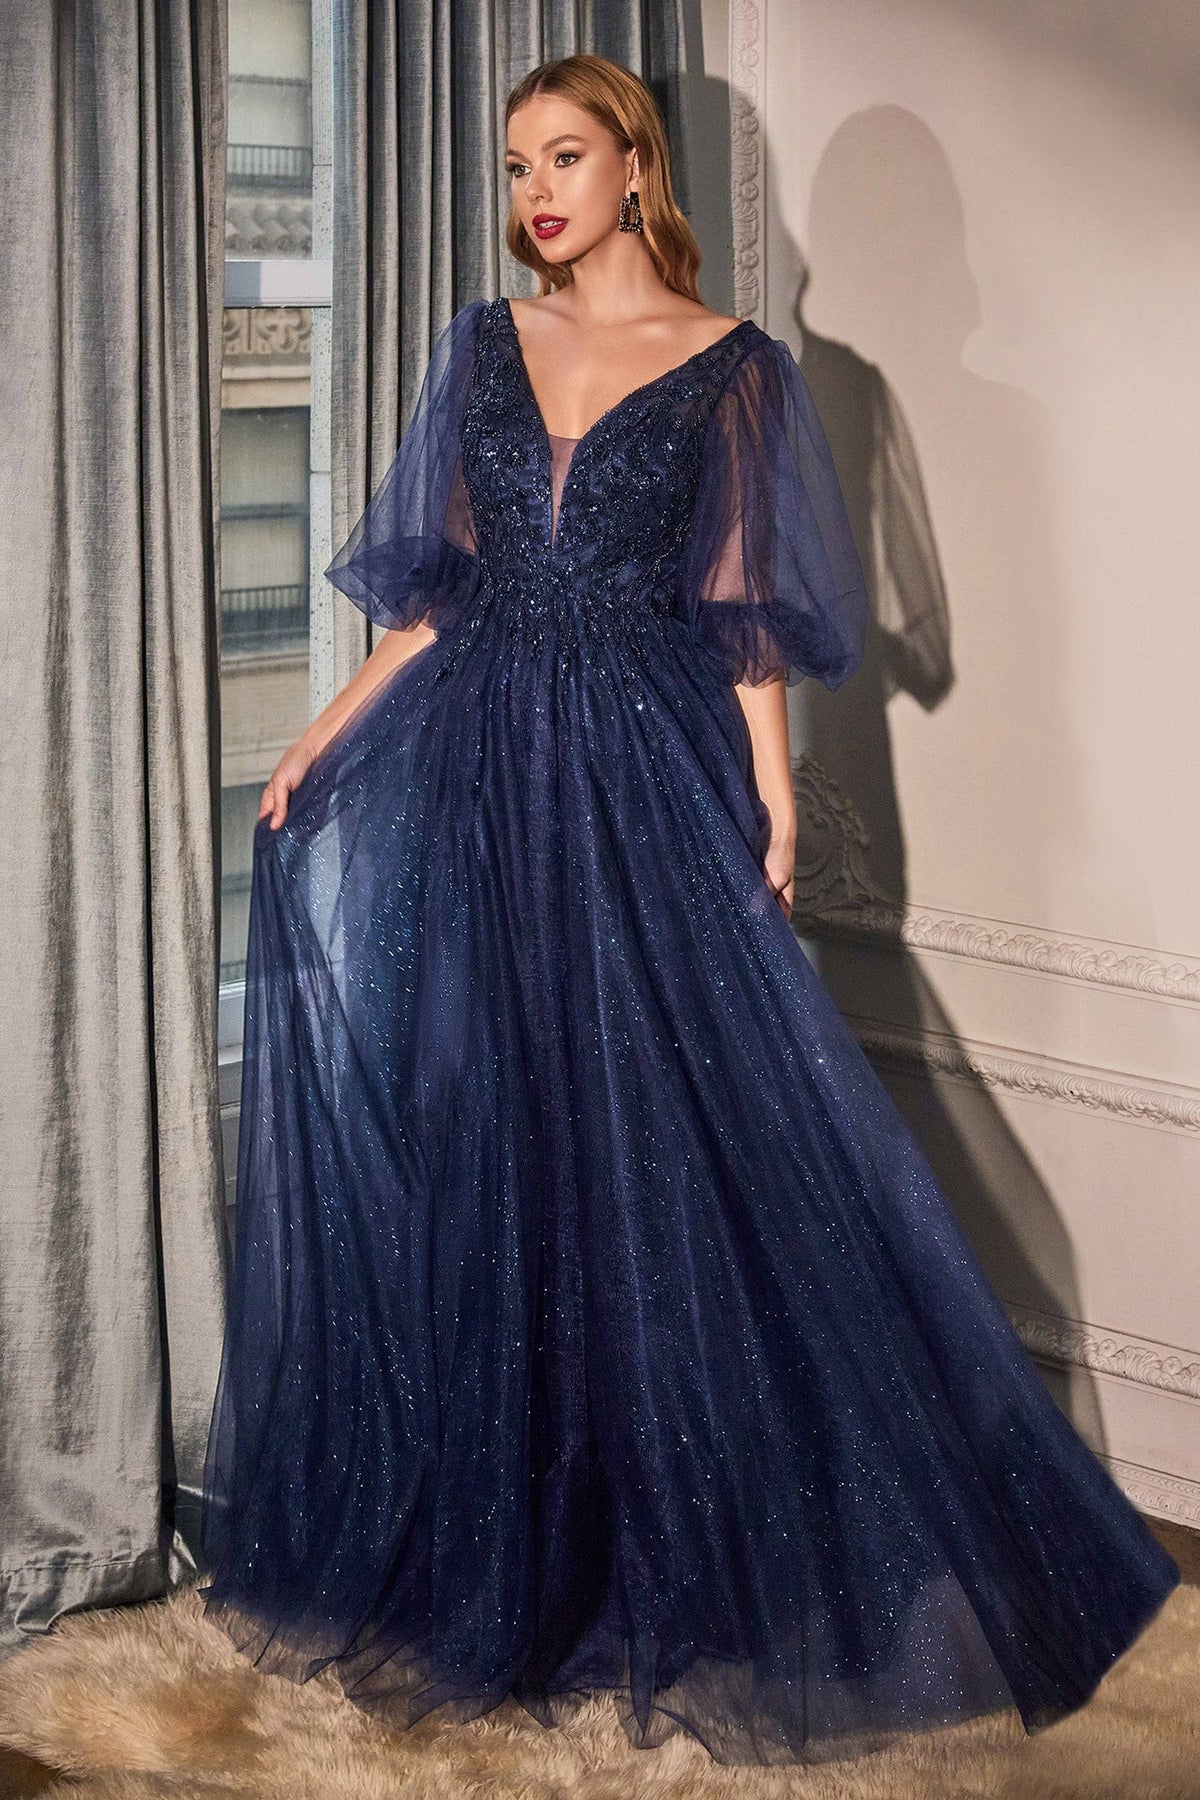 Stunning Corset Top Gown with Fitted Bodice and Fabric Sleeves #CDCB093